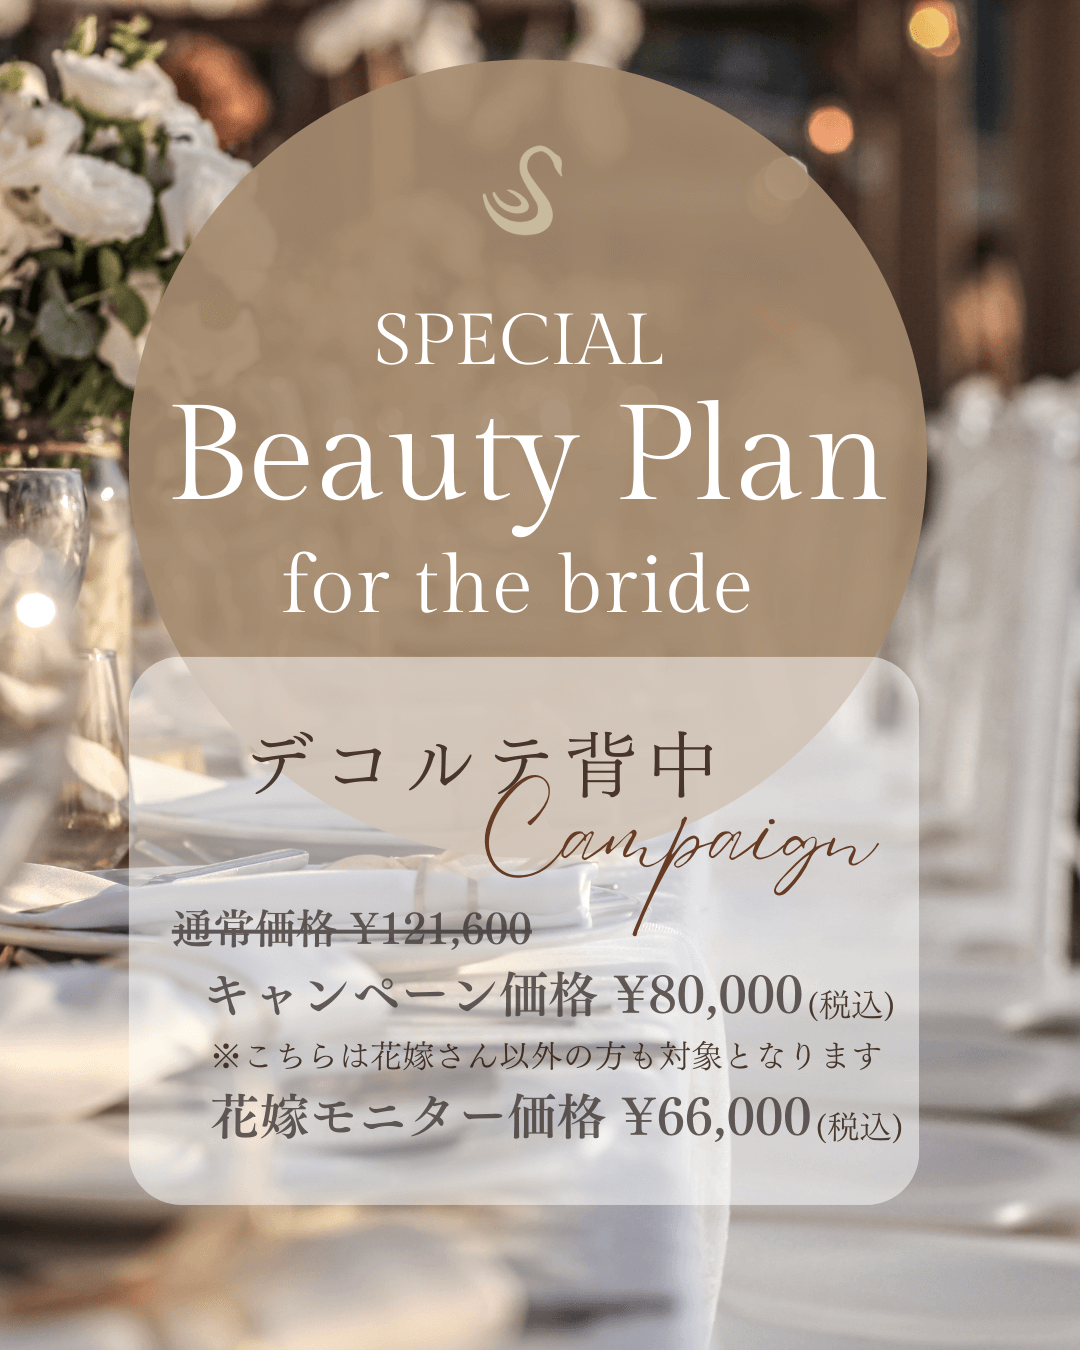 SPECIAL BEAUTY PLAN for the bride デコルテ背中キャンペーン